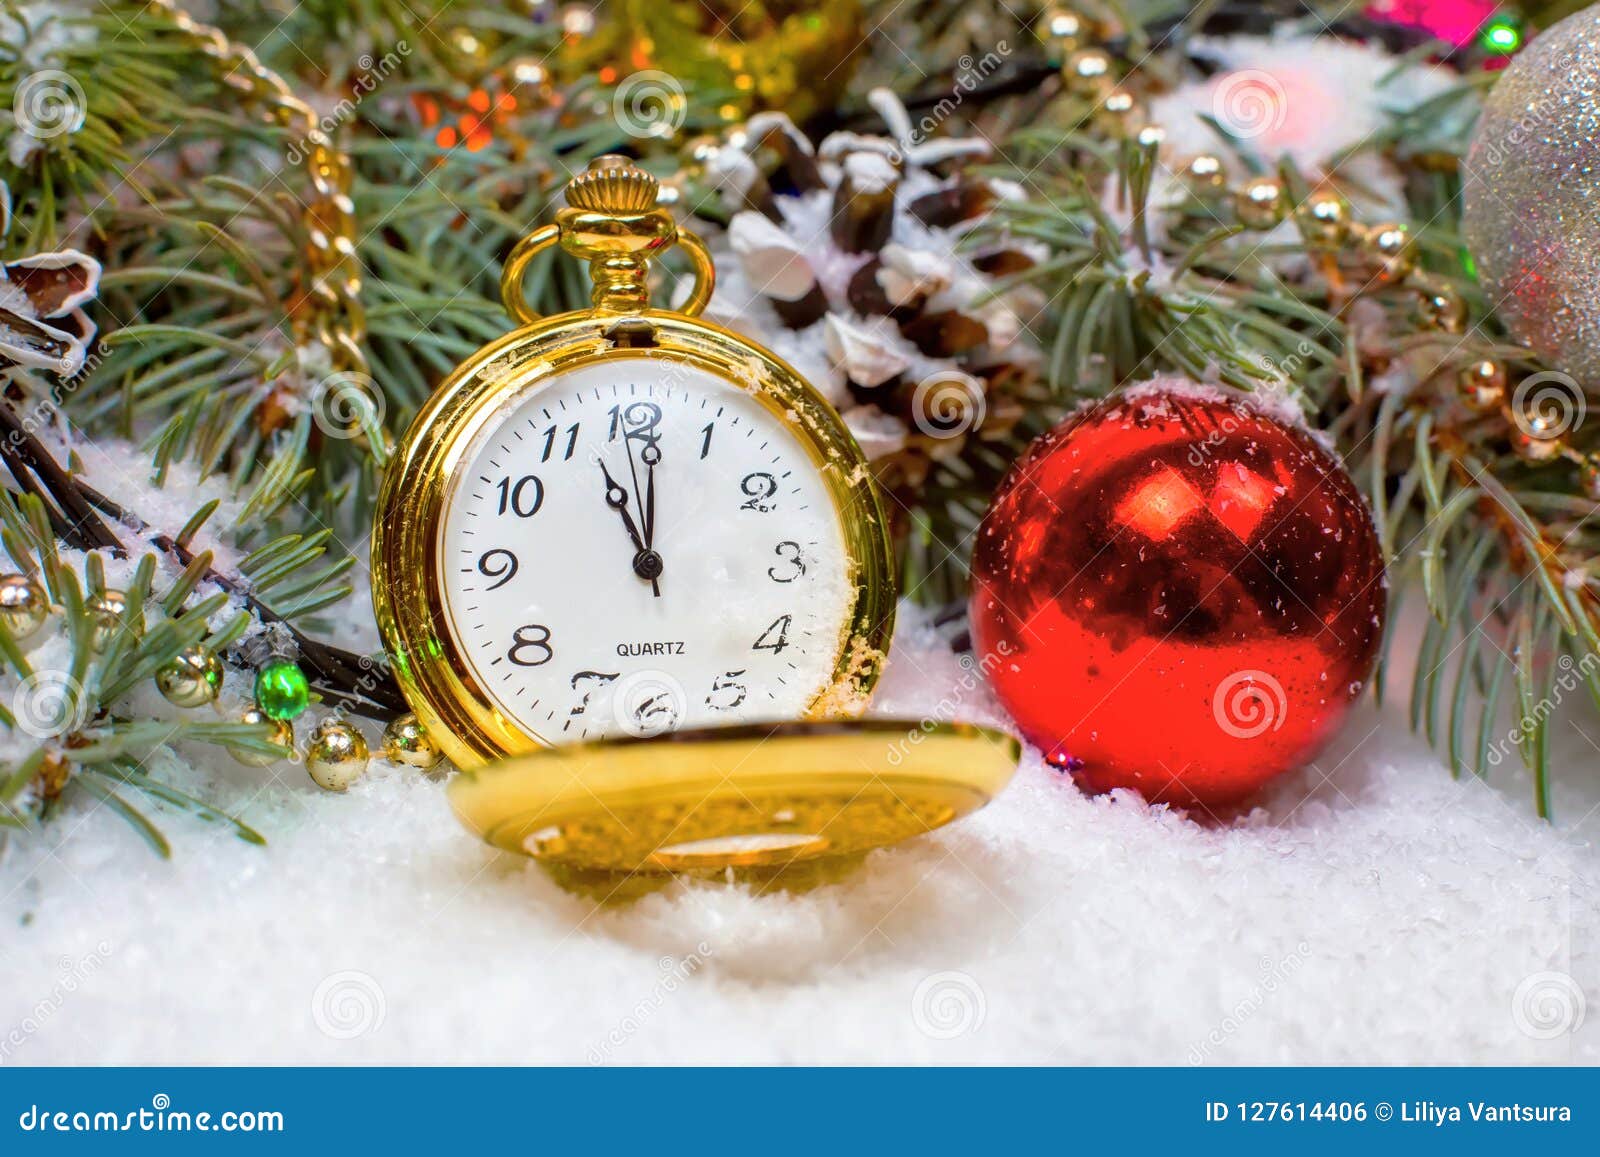 Sfondi Natalizi Vintage.A Vintage Clock In The Snow Against The Background Of A Christmas Tree And A Garland Stock Photo Image Of Garland Candles 127614406